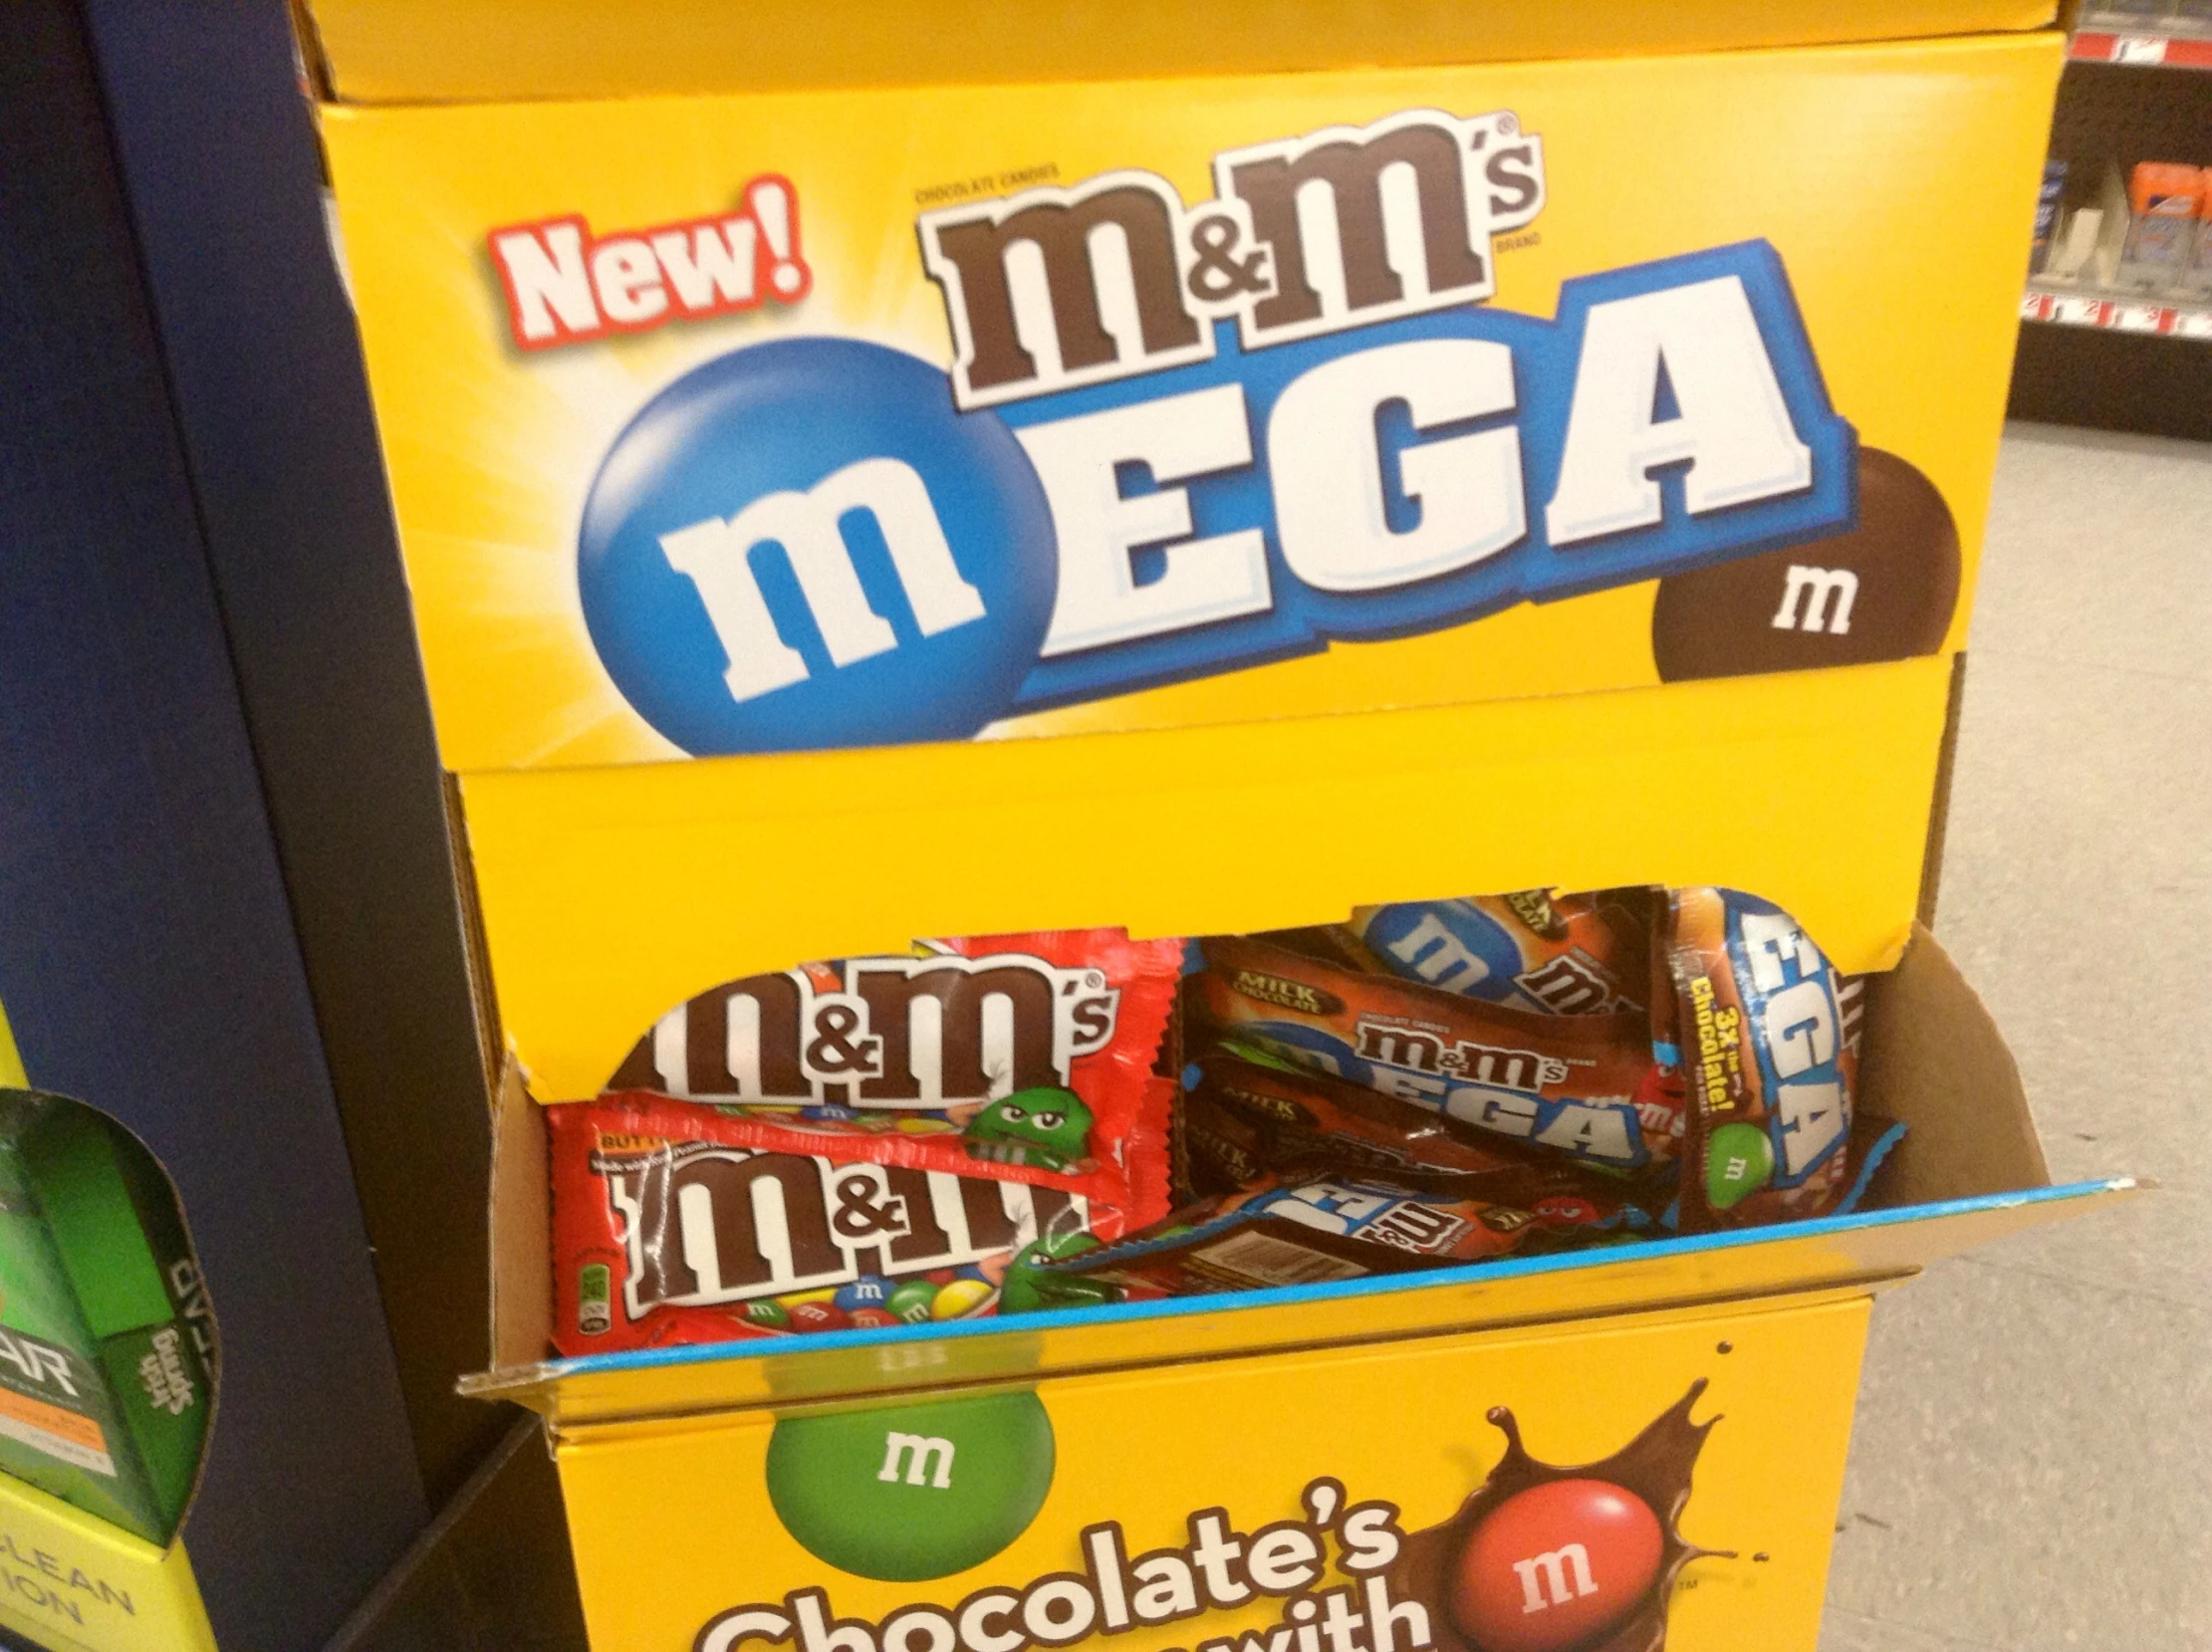 box of m & ms mega chewing candy and a display case of m'n m's chocolate